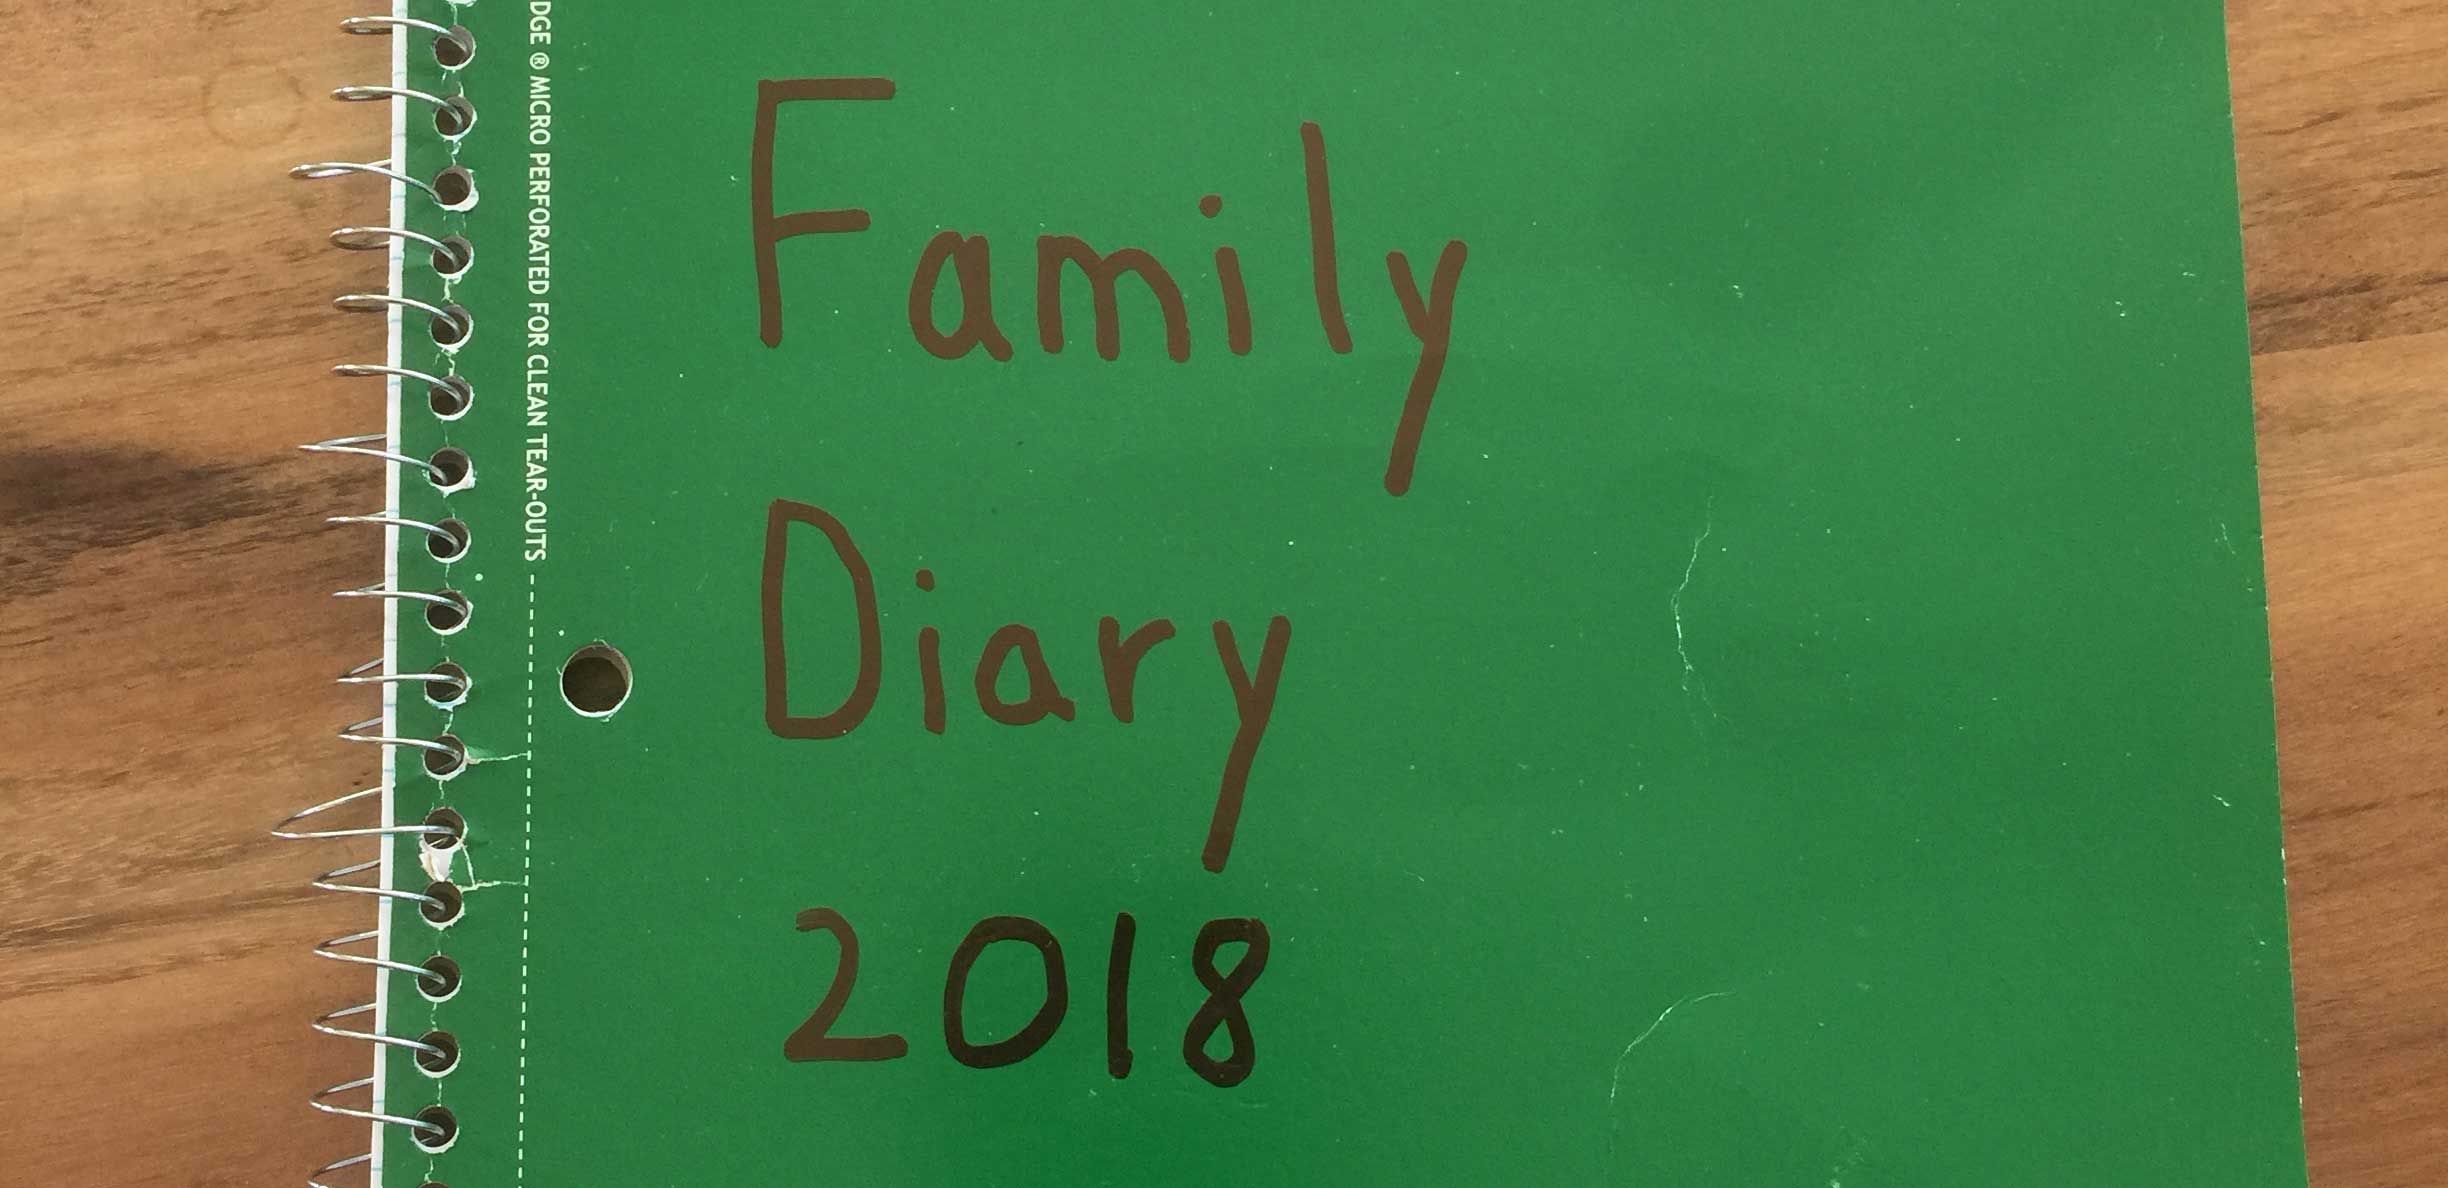 Try This At Home: The Family Diary